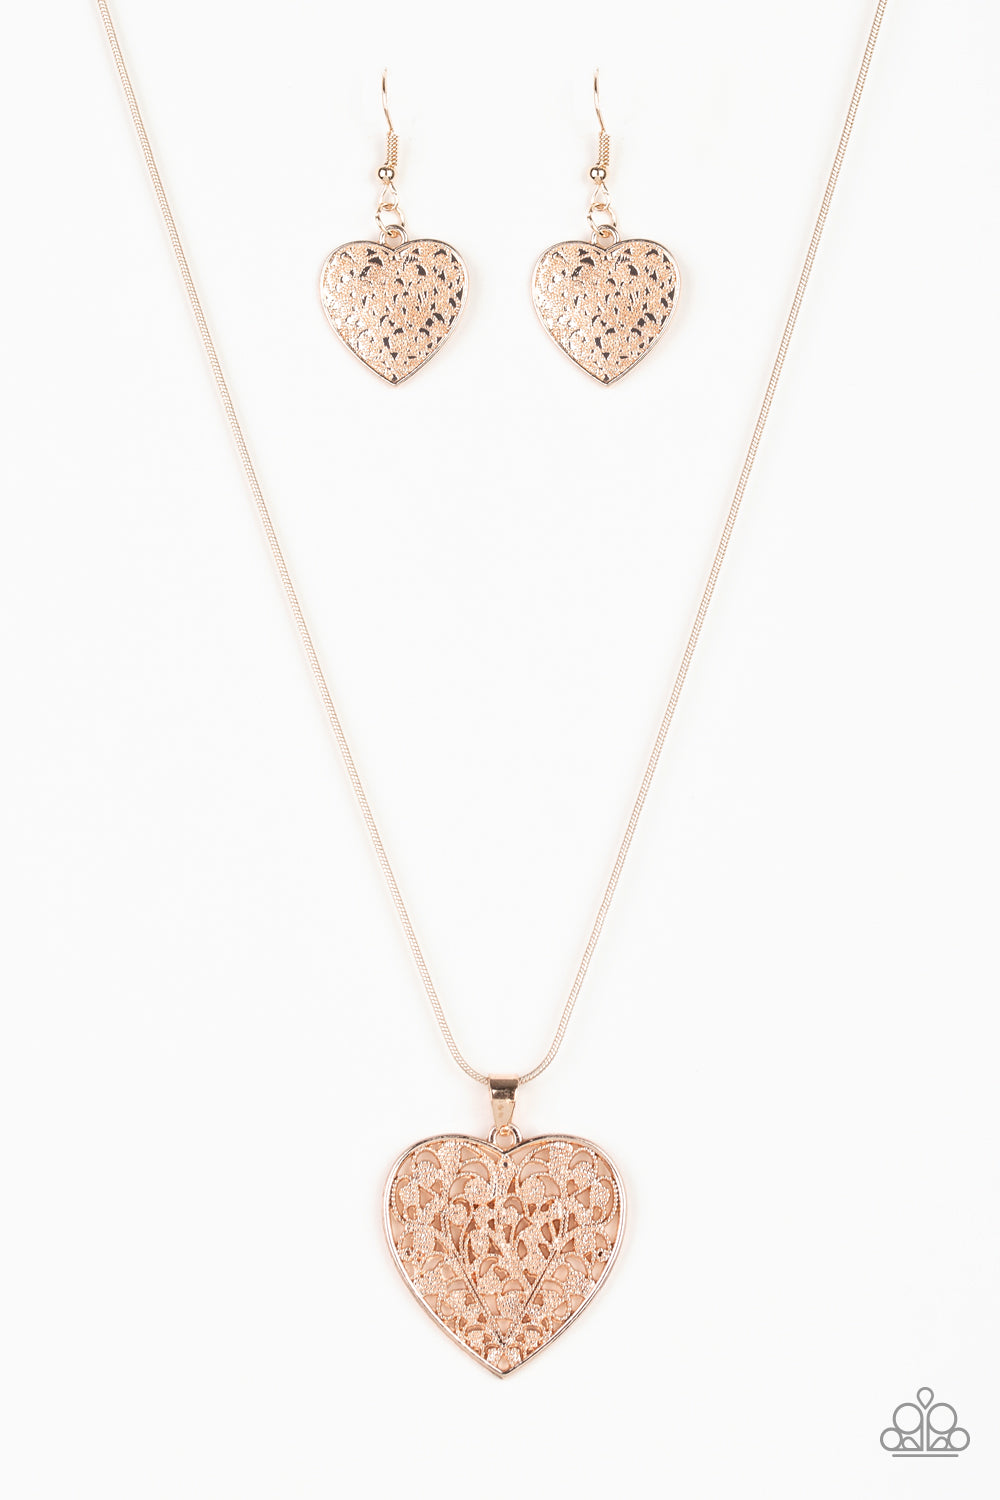 Look Into Your Heart Rose Gold Paparazzi Necklaces Cashmere Pink Jewels - Cashmere Pink Jewels & Accessories, Cashmere Pink Jewels & Accessories - Paparazzi